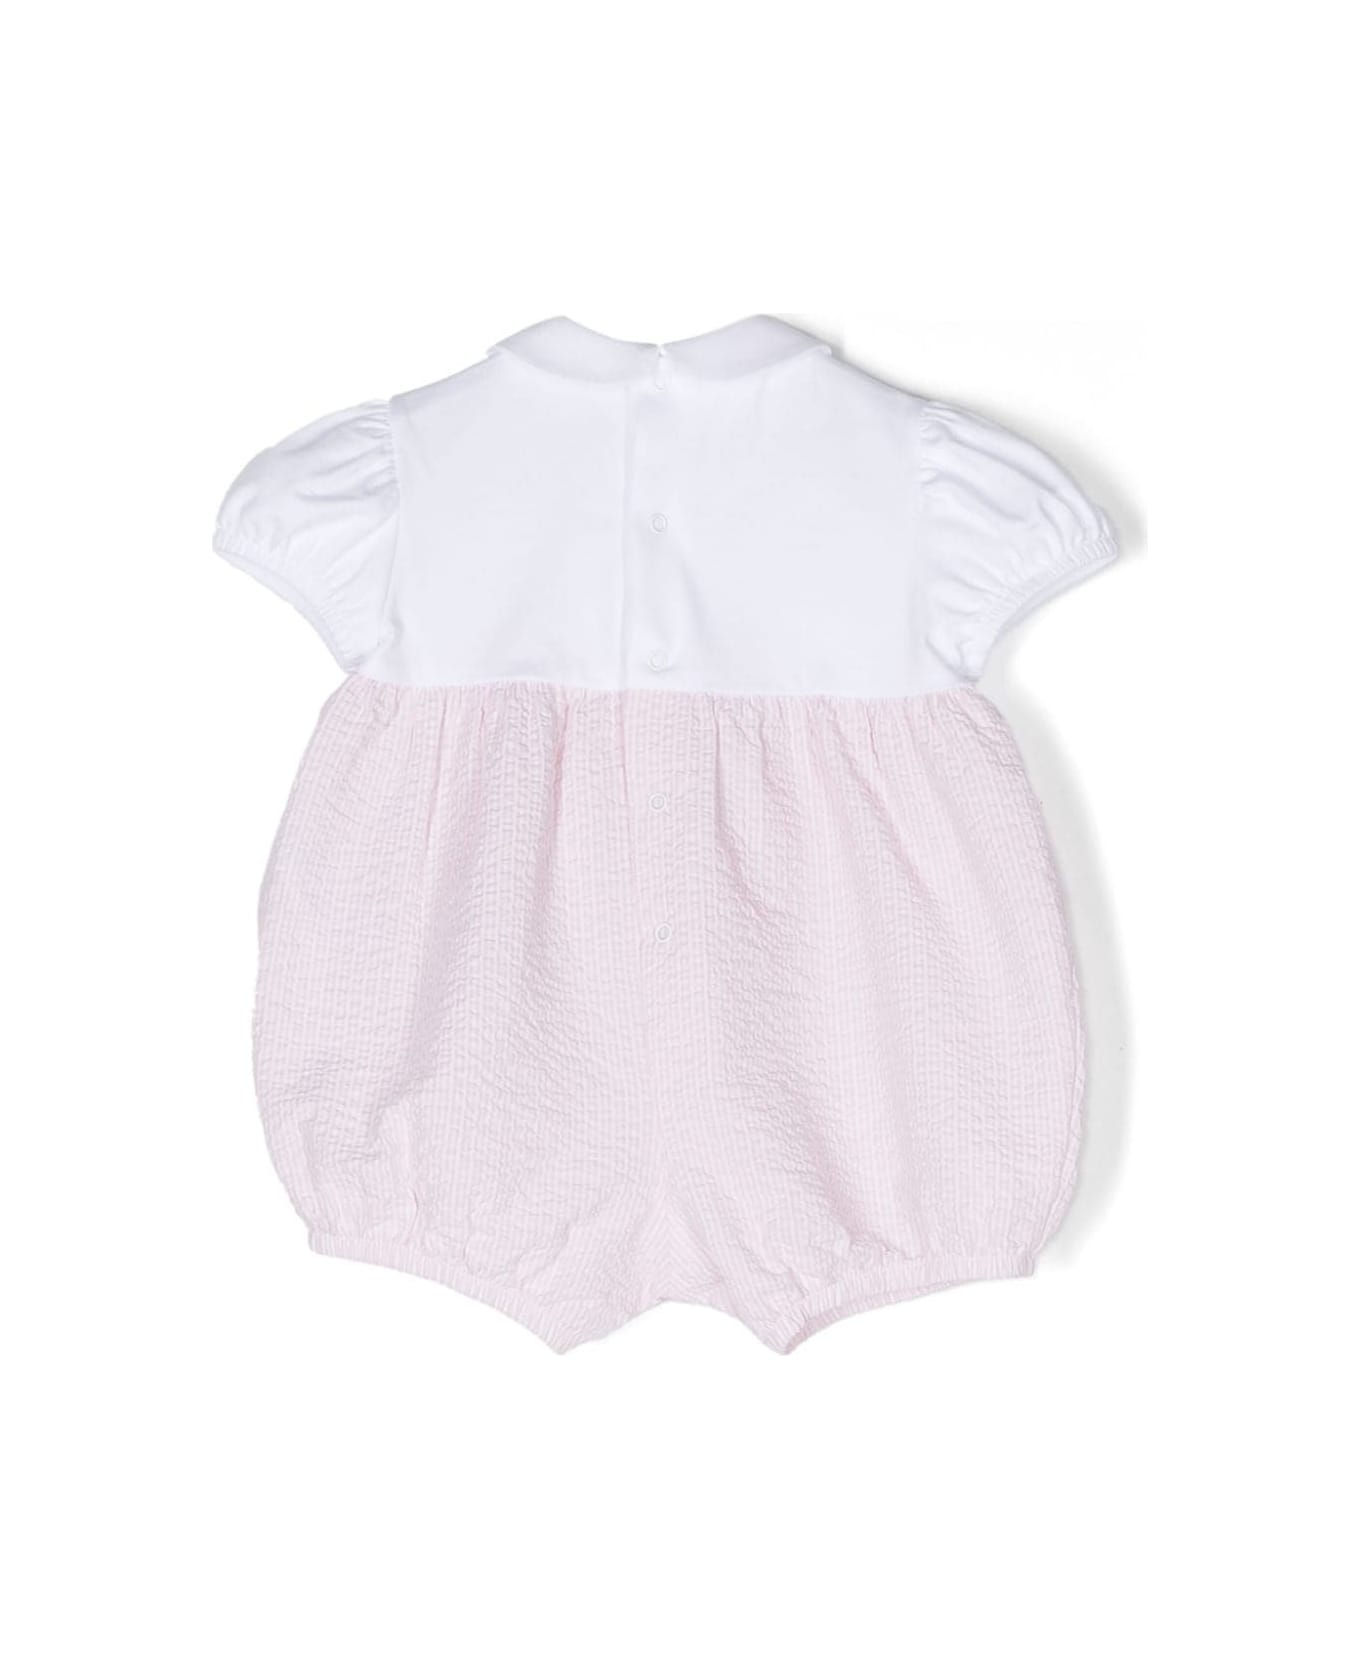 Il Gufo Pink And White Bimateric Short Playsuit With Appliqué Flowers - Pink